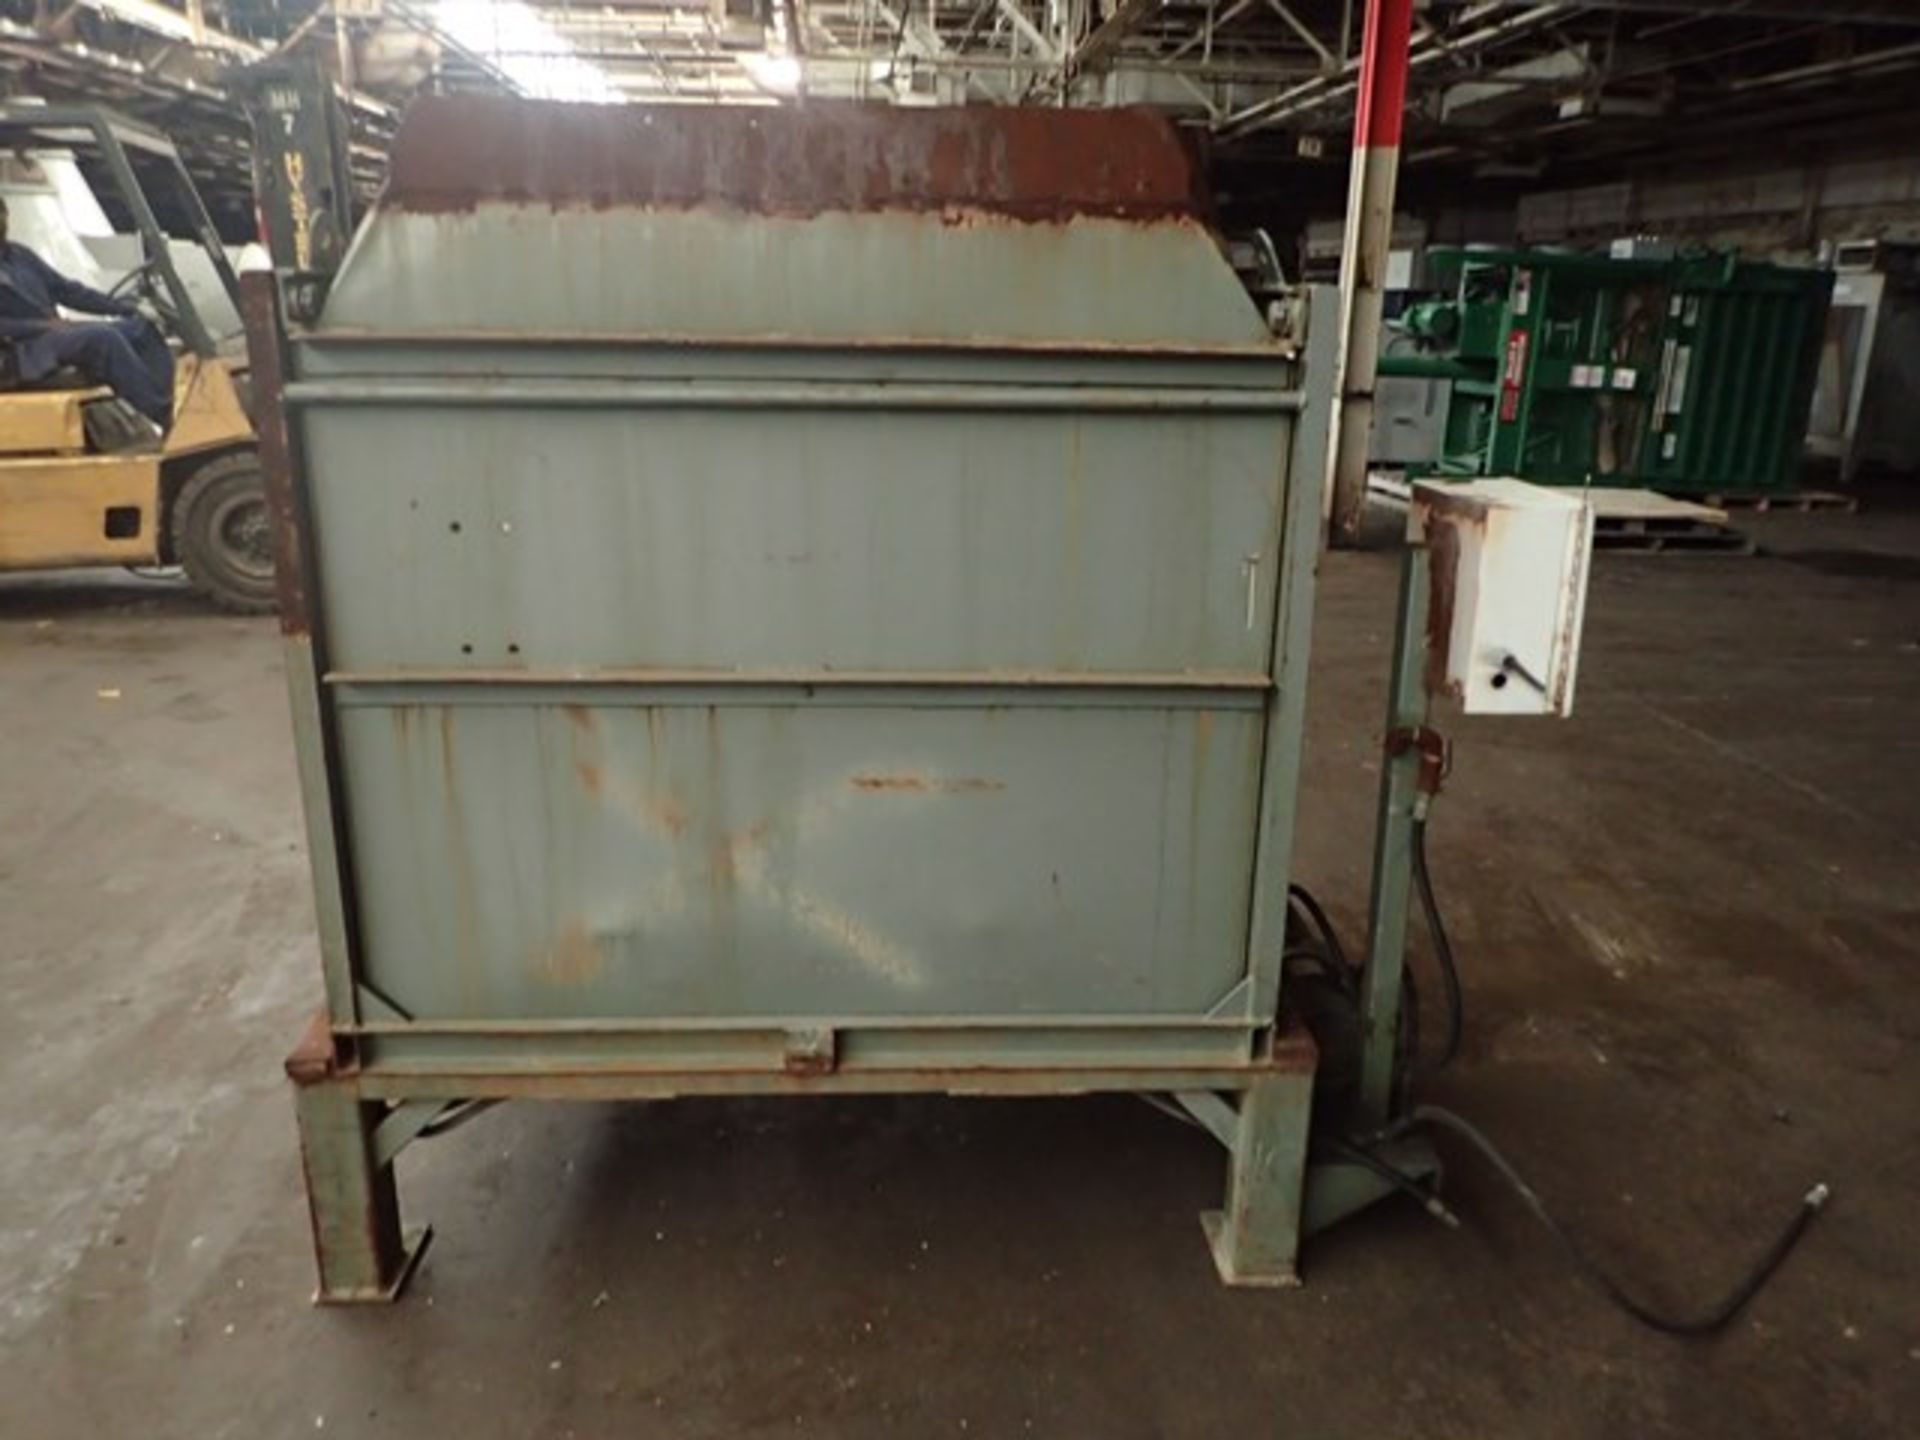 Hydraulic Box Dumper, Carbon Steel Construction - Image 3 of 5